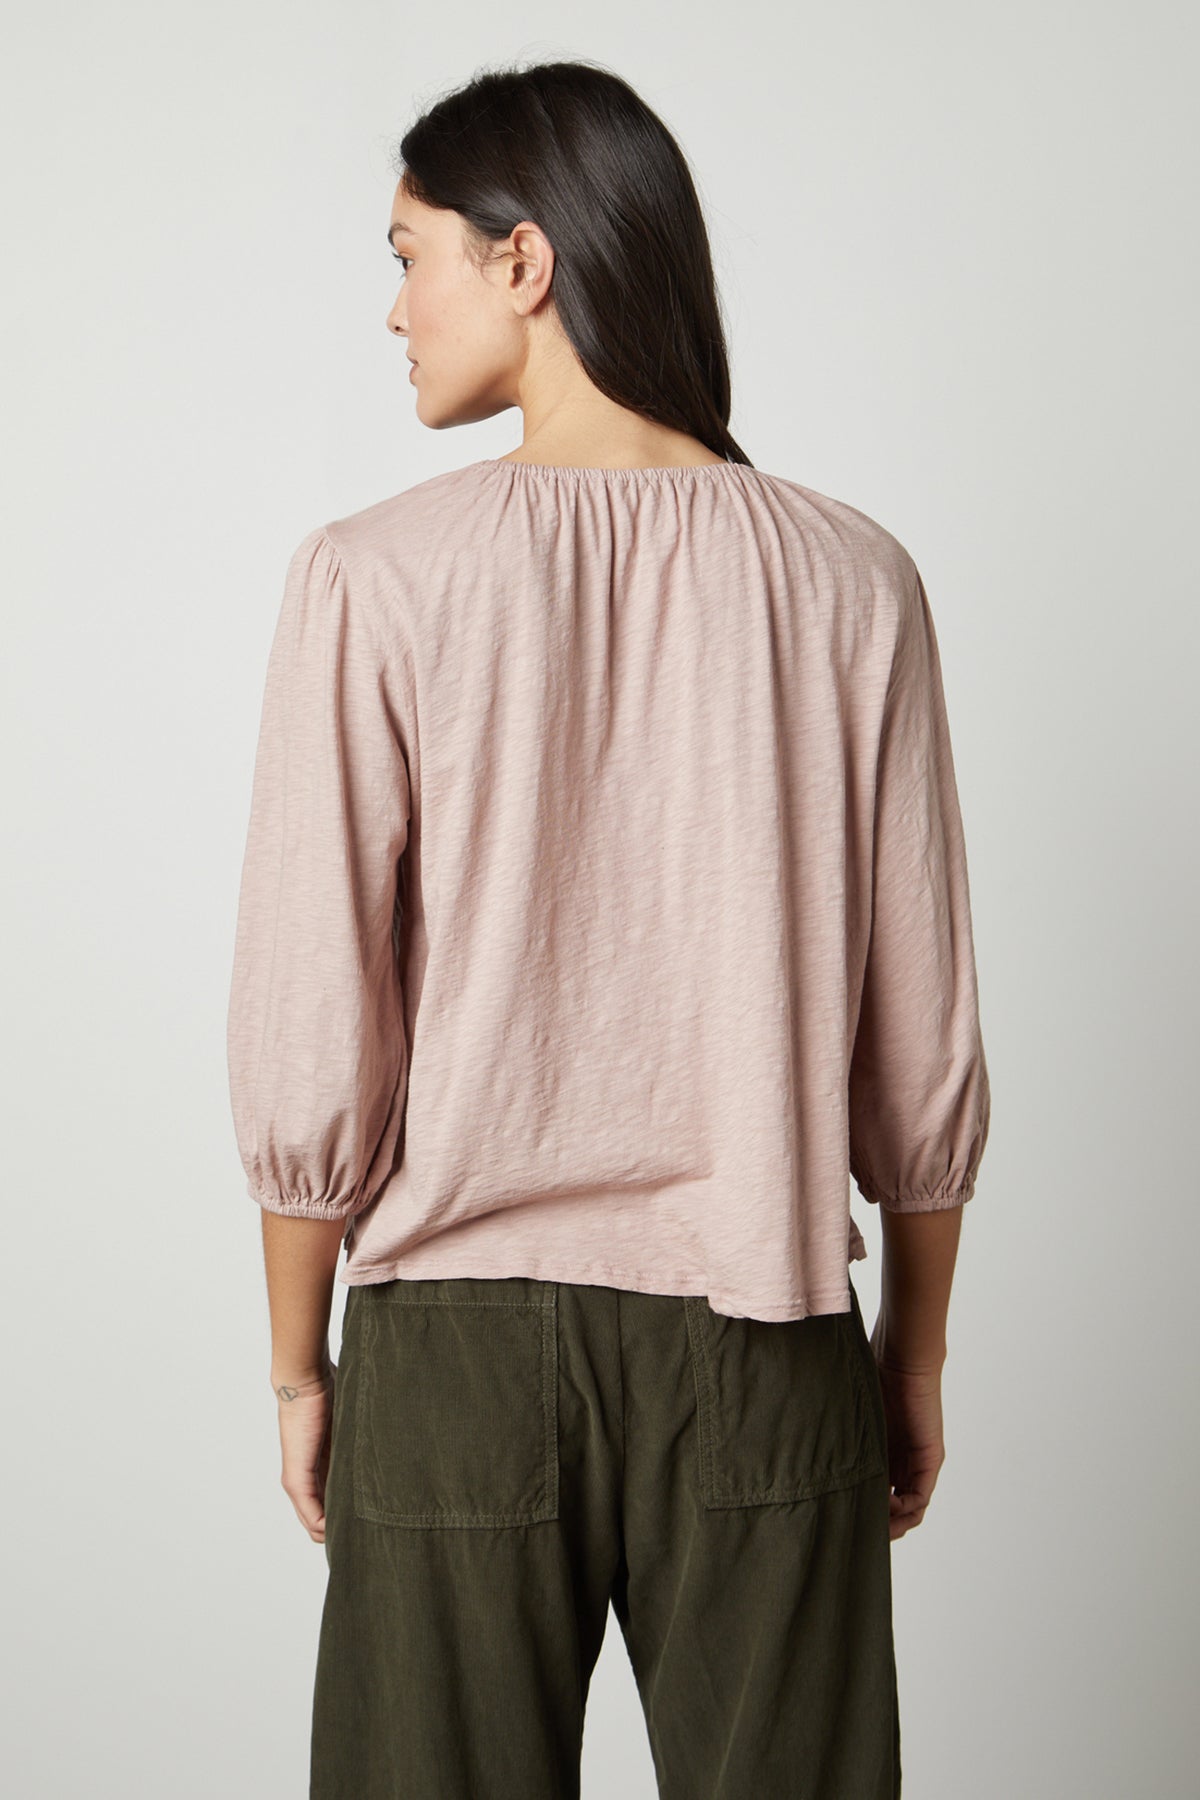   The back view of a woman wearing a Velvet by Graham & Spencer JULIE 3/4 SLEEVE TEE and green pants. 